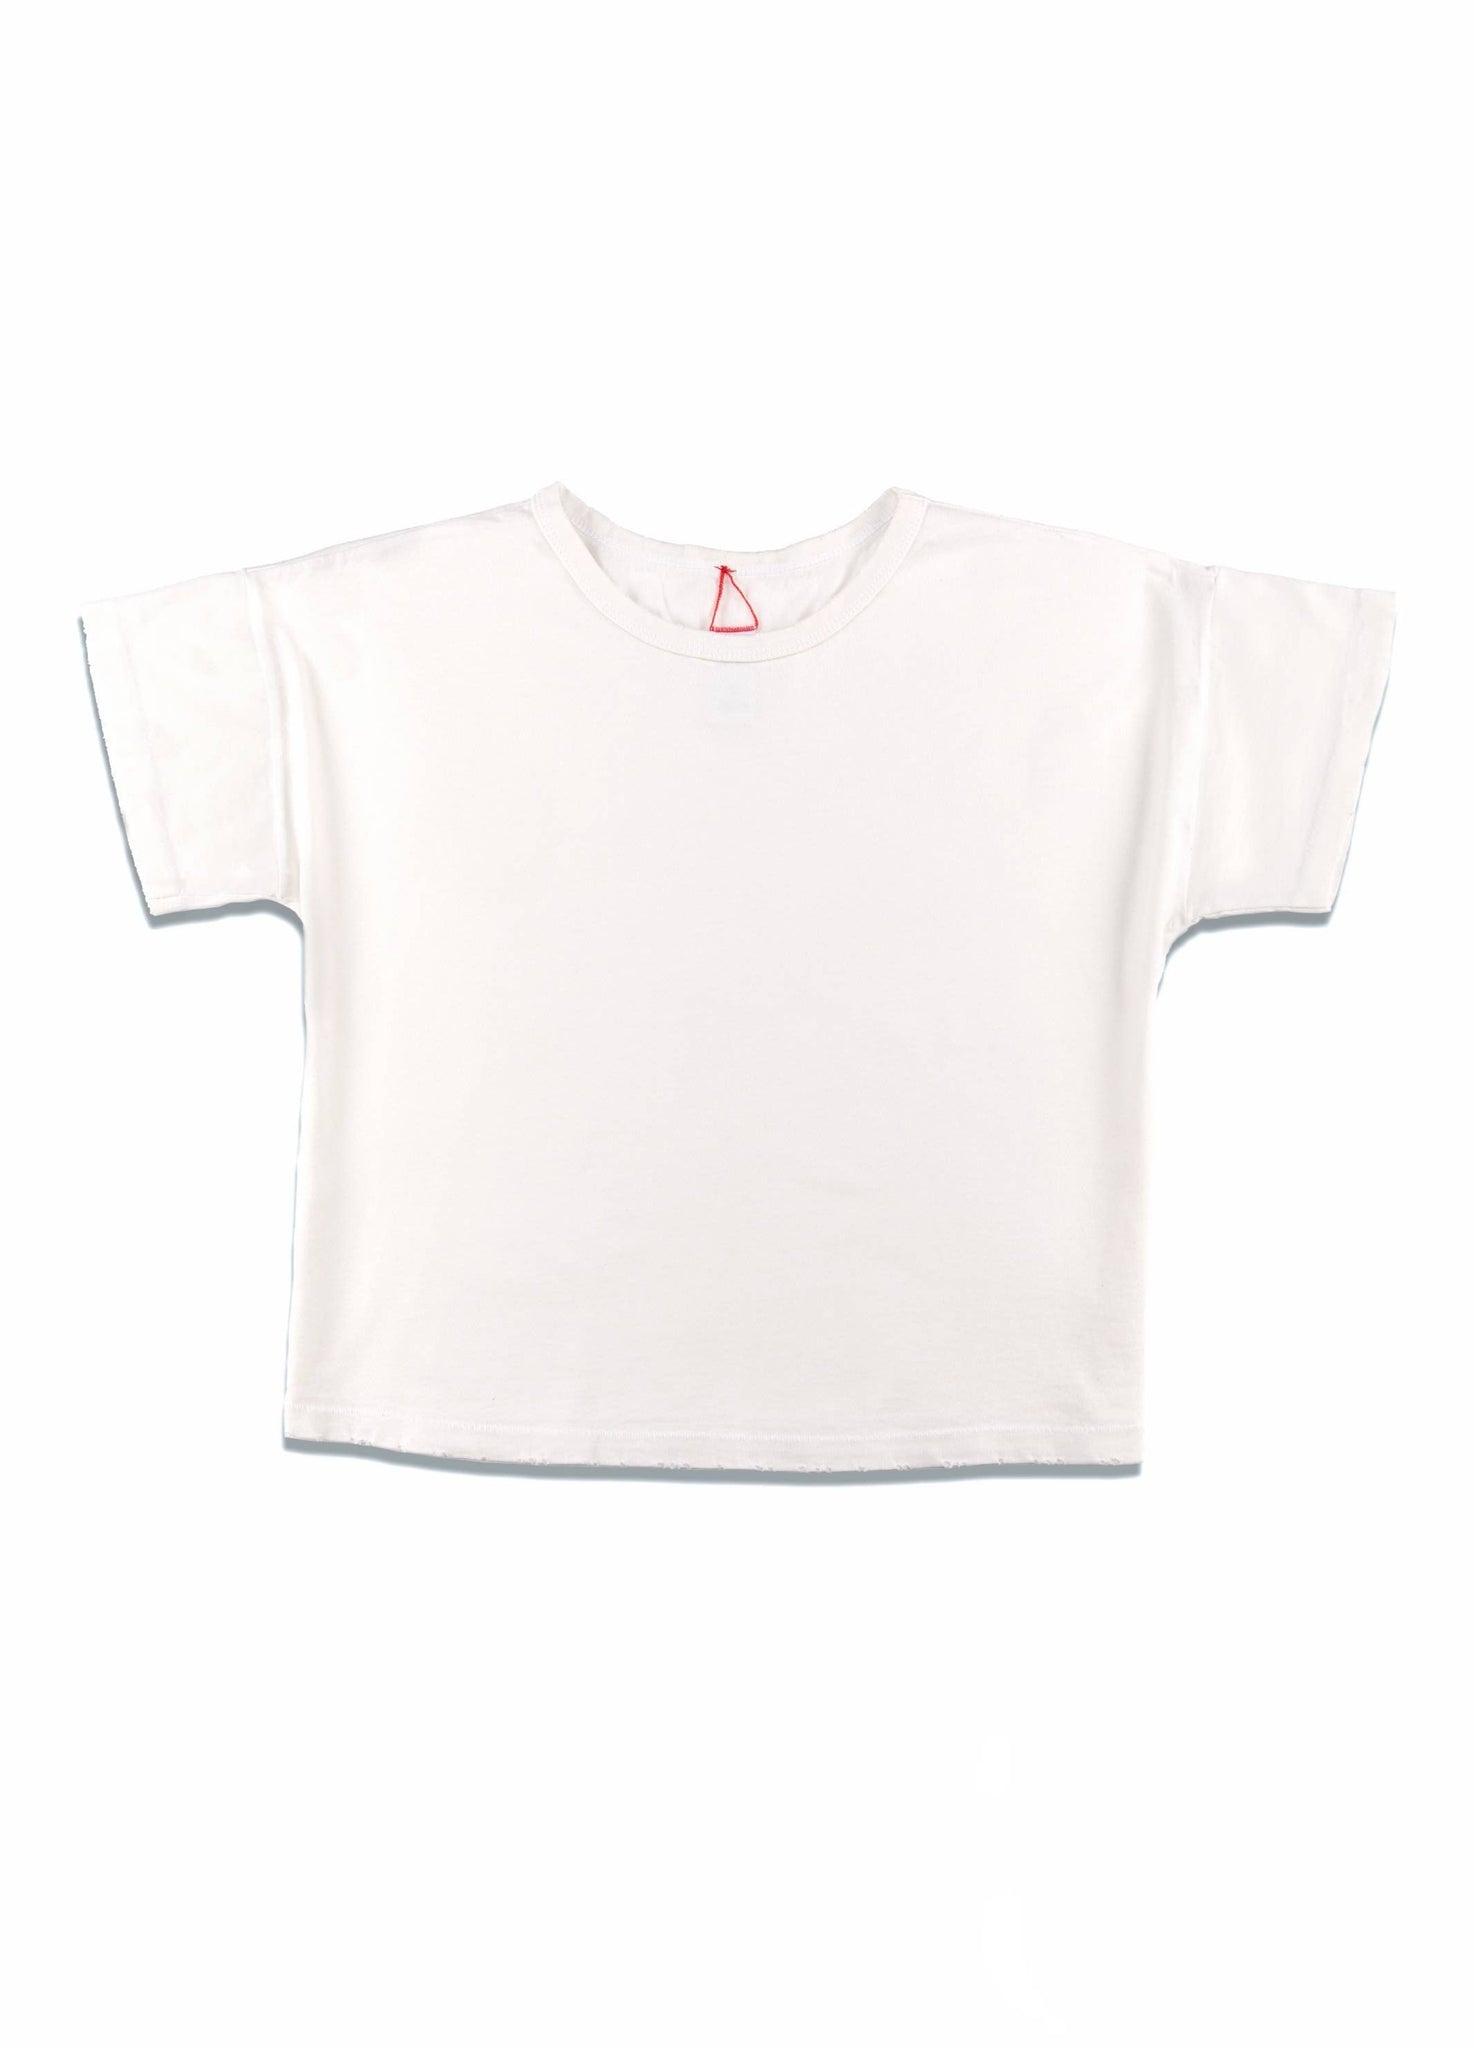 Fille Tee Clean White